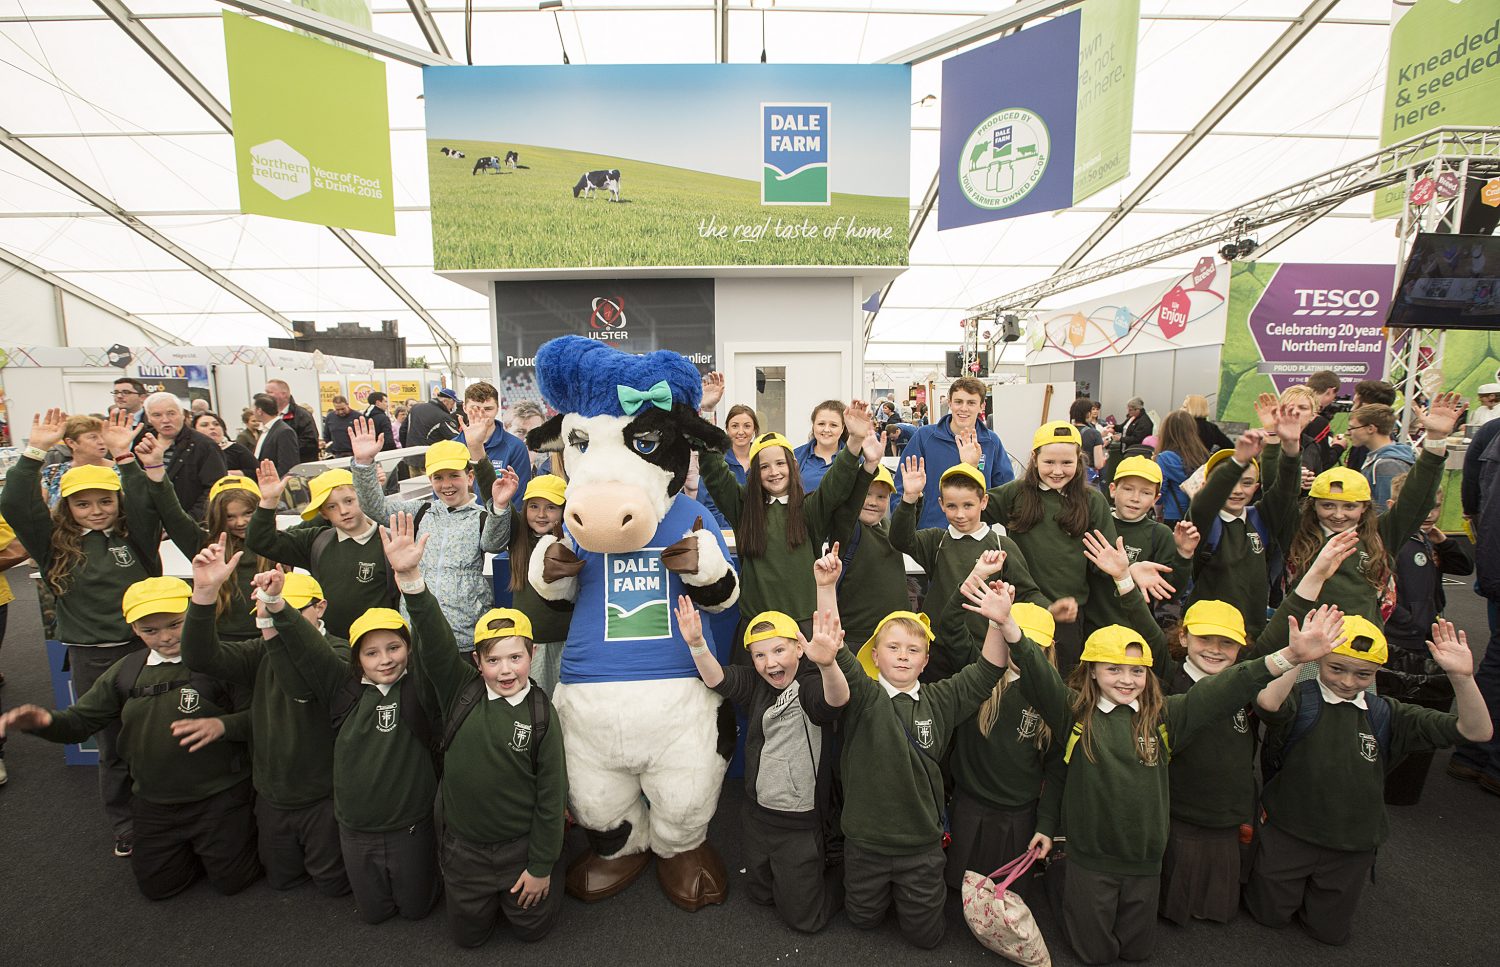 Balmoral Show visitors have legen-dairy time with Dale Farm